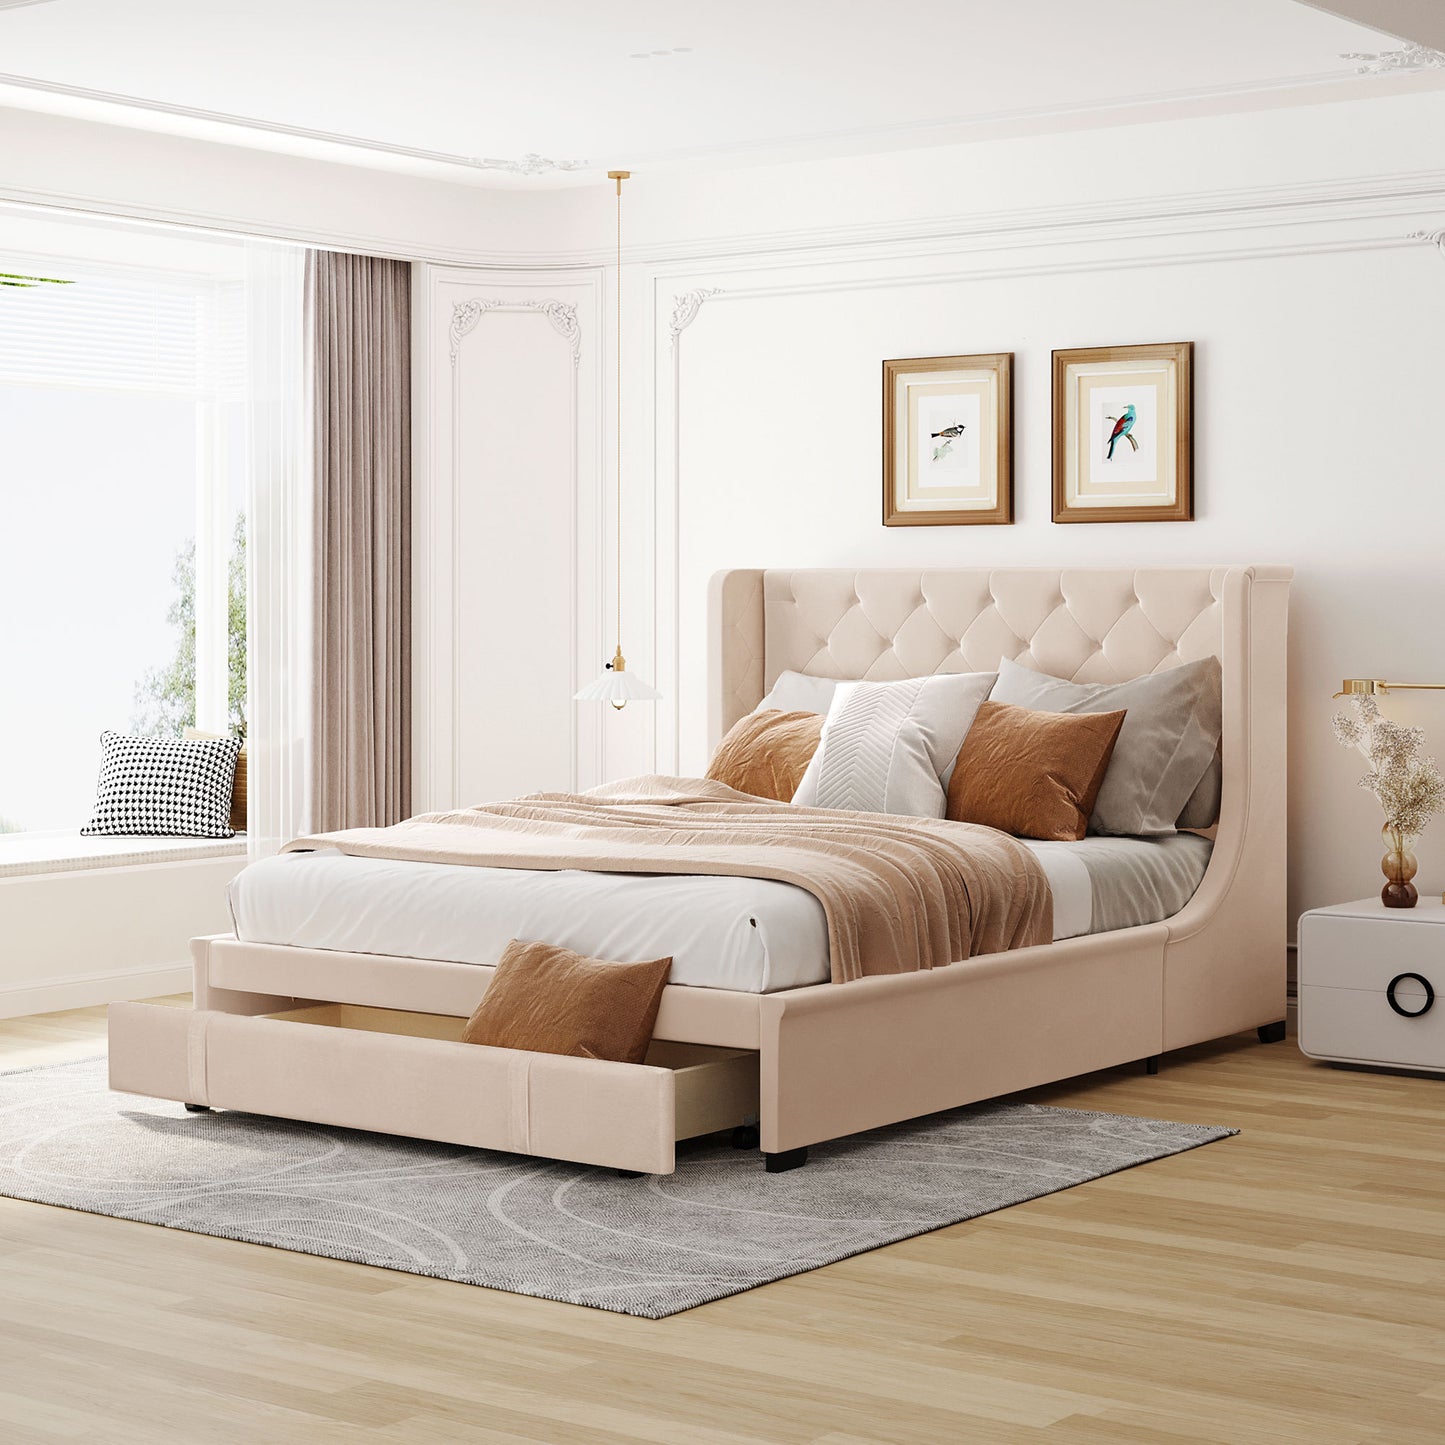 Queen Size Storage Bed Velvet Upholstered Platform Bed with Wingback Headboard and a Big Drawer (Beige)